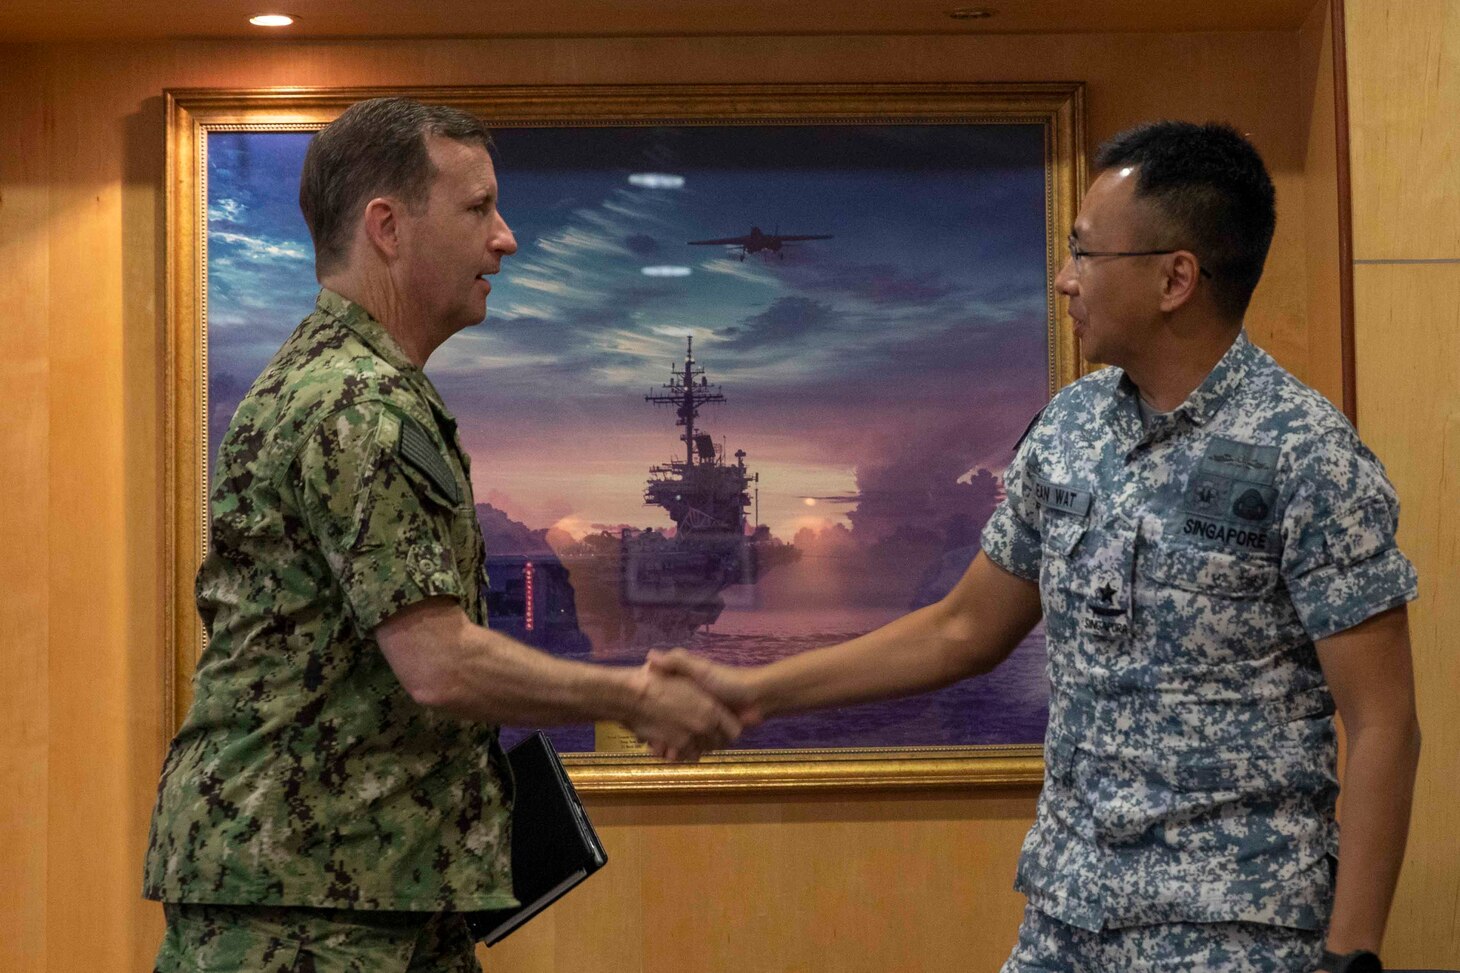 SINGAPORE (Jan. 9, 2023) Rear Adm. Mark Melson, Commander, Logistics Group Western Pacific/Task Force 73, and Rear Adm. Sean Wat, Fleet Commander, Republic of Singapore Navy (RSN), shake hands prior to the opening ceremony of Cooperation Afloat Readiness and Training (CARAT)/Marine Exercise (MAREX) Singapore 2022, Jan. 9, 2023. CARAT Singapore is a bilateral exercise between Singapore and the United States designed to promote regional security cooperation, maintain and strengthen maritime partnerships, and enhance maritime cooperation. In its 28th, the CARAT series is comprised of multinational exercises, designed to enhance U.S. and partner forces’ abilities to operate together in response to traditional and non-traditional maritime security challenges in the Indo-Pacific region. The Makin Island Amphibious Ready Group, comprised of Makin Island, Murtha and amphibious transport dock USS Anchorage (LPD 23), is operating in the U.S. 7th Fleet area of operations with the embarked 13th Marine Expeditionary Unit to enhance interoperability with Allies and partners and serve as a ready-response force to defend peace and maintain stability in the Indo-Pacific region.  (U.S. Navy photo by Mass Communication Specialist 3rd Class Kendra Helmbrecht)